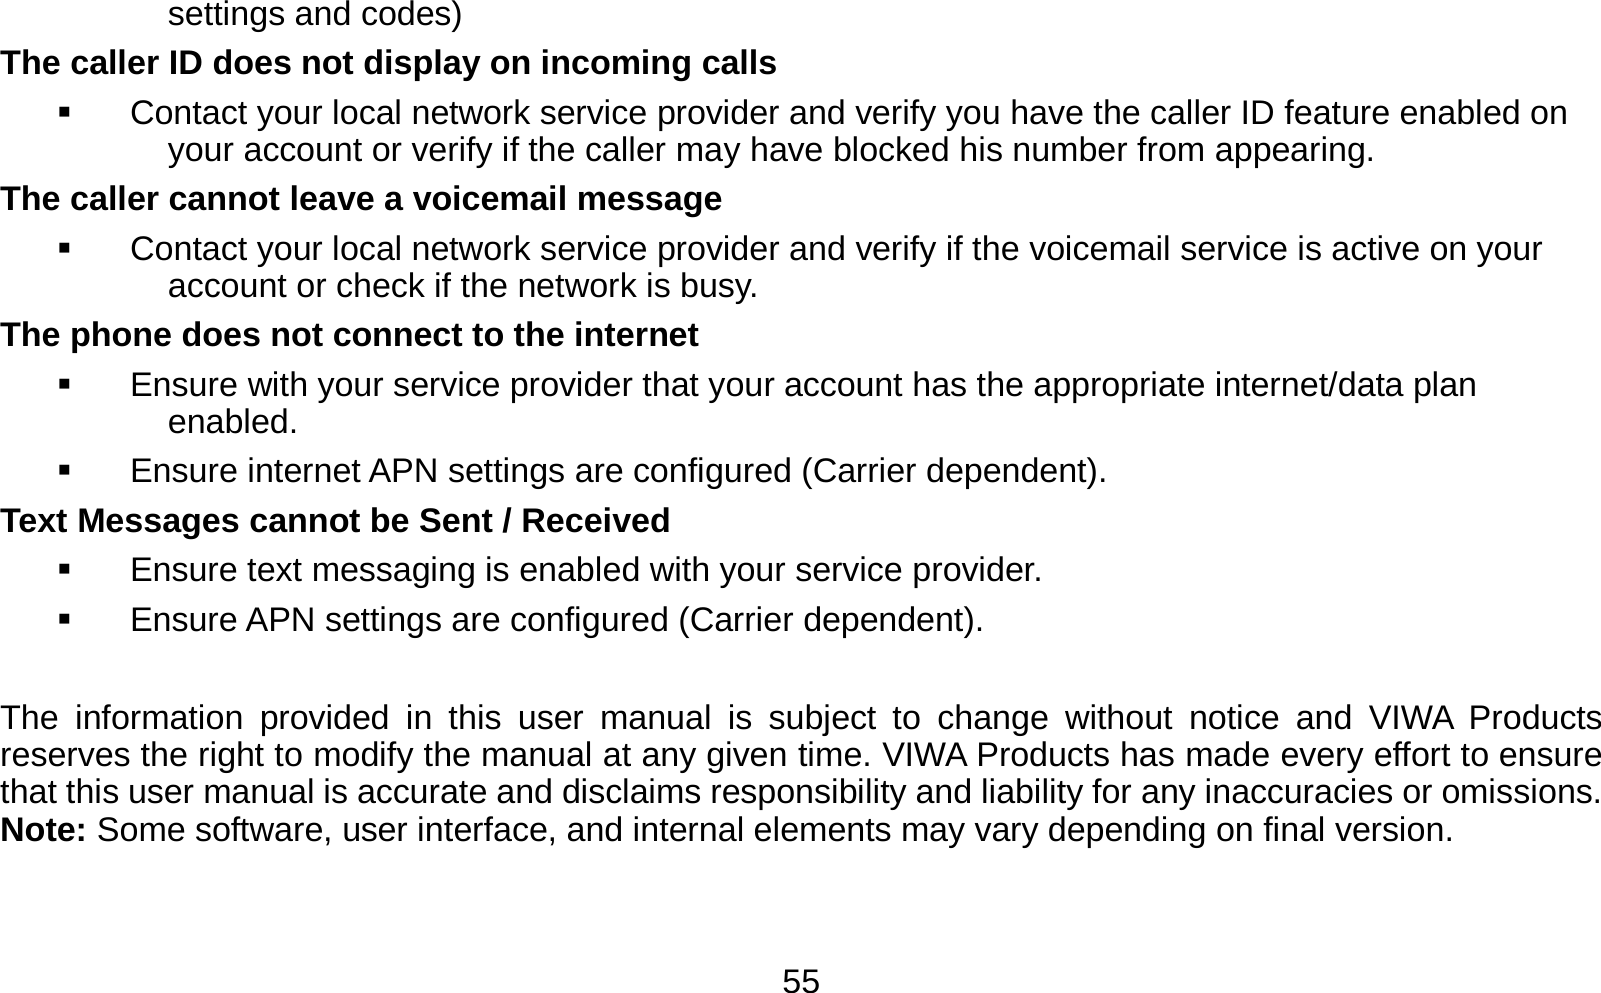   55settings and codes) The caller ID does not display on incoming calls   Contact your local network service provider and verify you have the caller ID feature enabled on your account or verify if the caller may have blocked his number from appearing. The caller cannot leave a voicemail message   Contact your local network service provider and verify if the voicemail service is active on your account or check if the network is busy. The phone does not connect to the internet   Ensure with your service provider that your account has the appropriate internet/data plan enabled.   Ensure internet APN settings are configured (Carrier dependent).   Text Messages cannot be Sent / Received     Ensure text messaging is enabled with your service provider.   Ensure APN settings are configured (Carrier dependent).  The information provided in this user manual is subject to change without notice and VIWA Products reserves the right to modify the manual at any given time. VIWA Products has made every effort to ensure that this user manual is accurate and disclaims responsibility and liability for any inaccuracies or omissions. Note: Some software, user interface, and internal elements may vary depending on final version.   